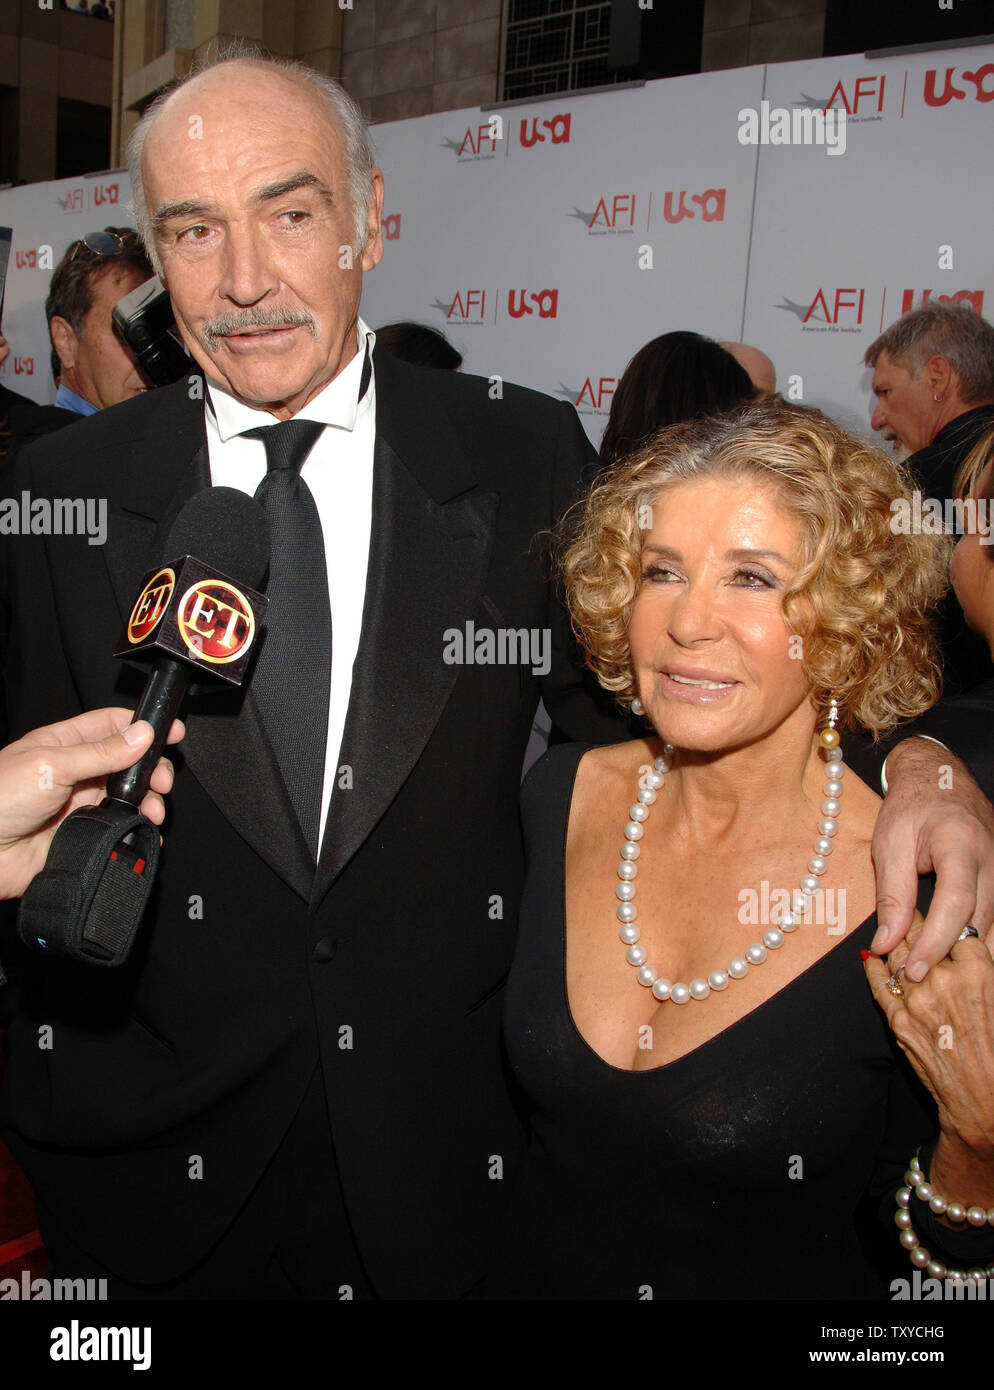 Sean Connery (L) and wife Micheline arrive for American Film Institute's 'AFI Life Achievement Award: A Tribute to Sir Sean Connery' taping in the Hollywood section of Los Angeles, California on June 8, 2006. Actor Harrison Ford presented the Lifetime Achievement Award to Connery. The two actors starred together in the 1989 film 'Indiana Jones and the Last Crusade.'  (UPI Photo/Jim Ruymen) Stock Photo